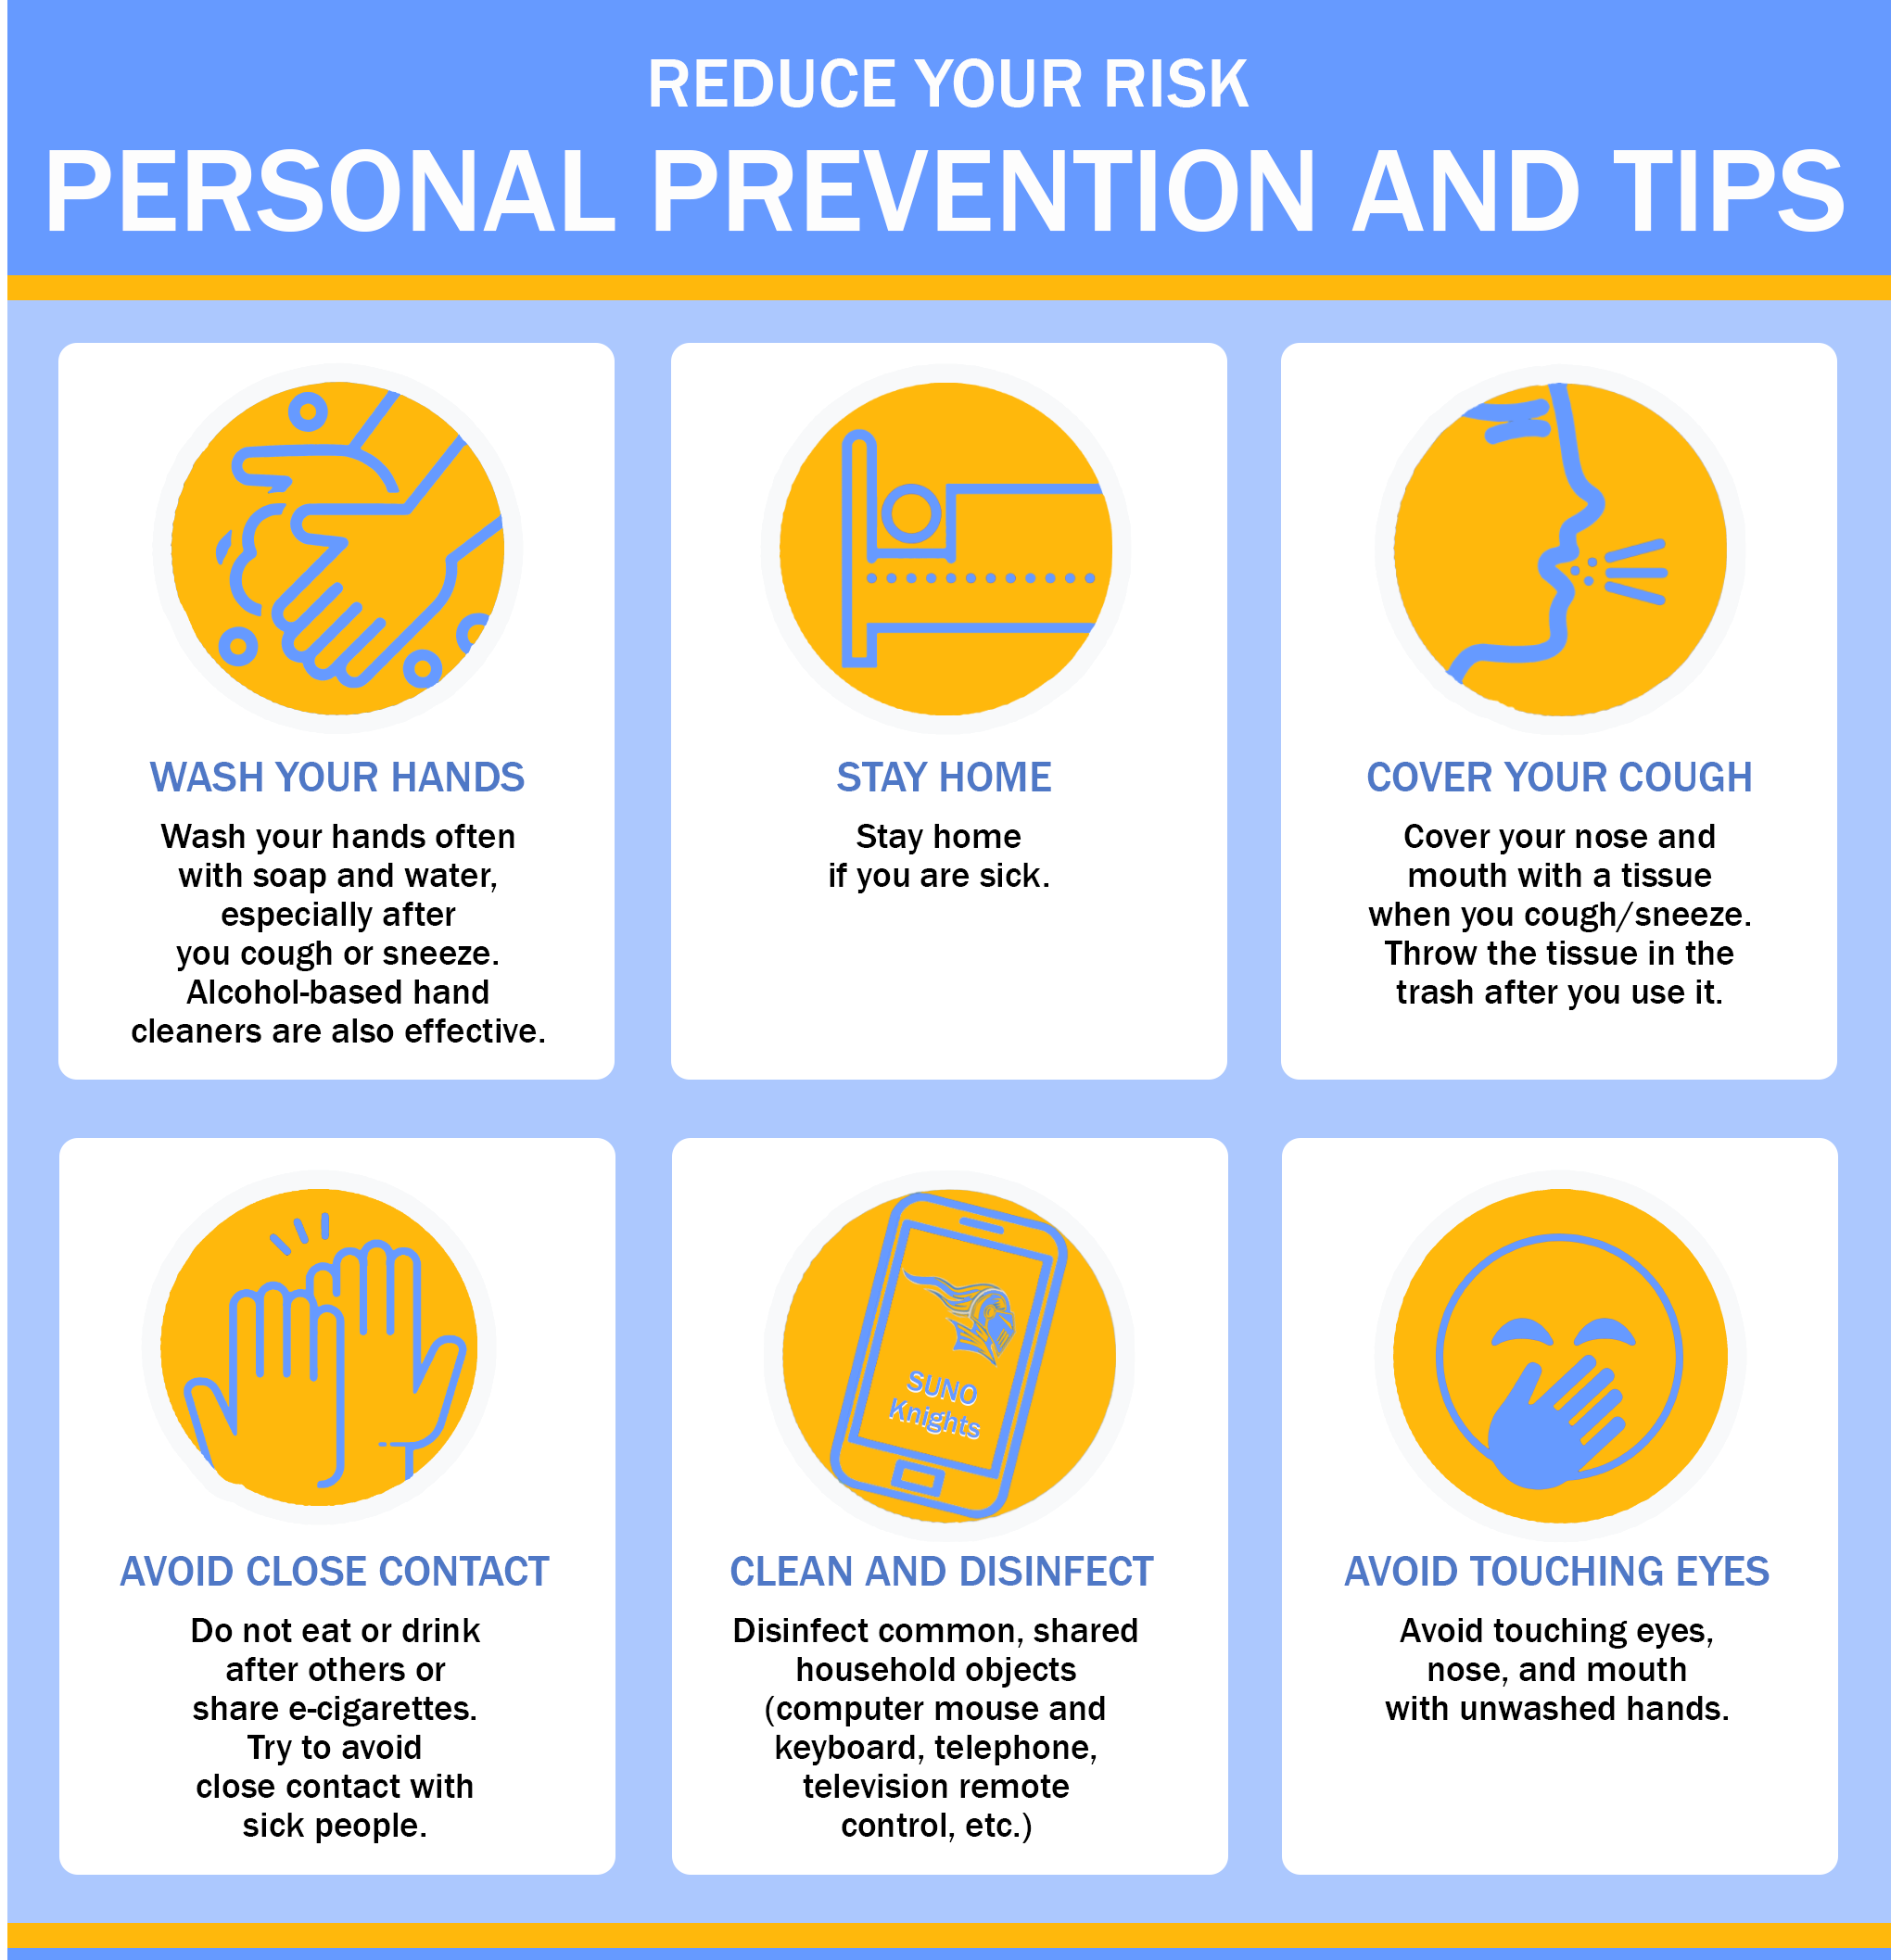 PERSONAL PREVENTION & TIPS